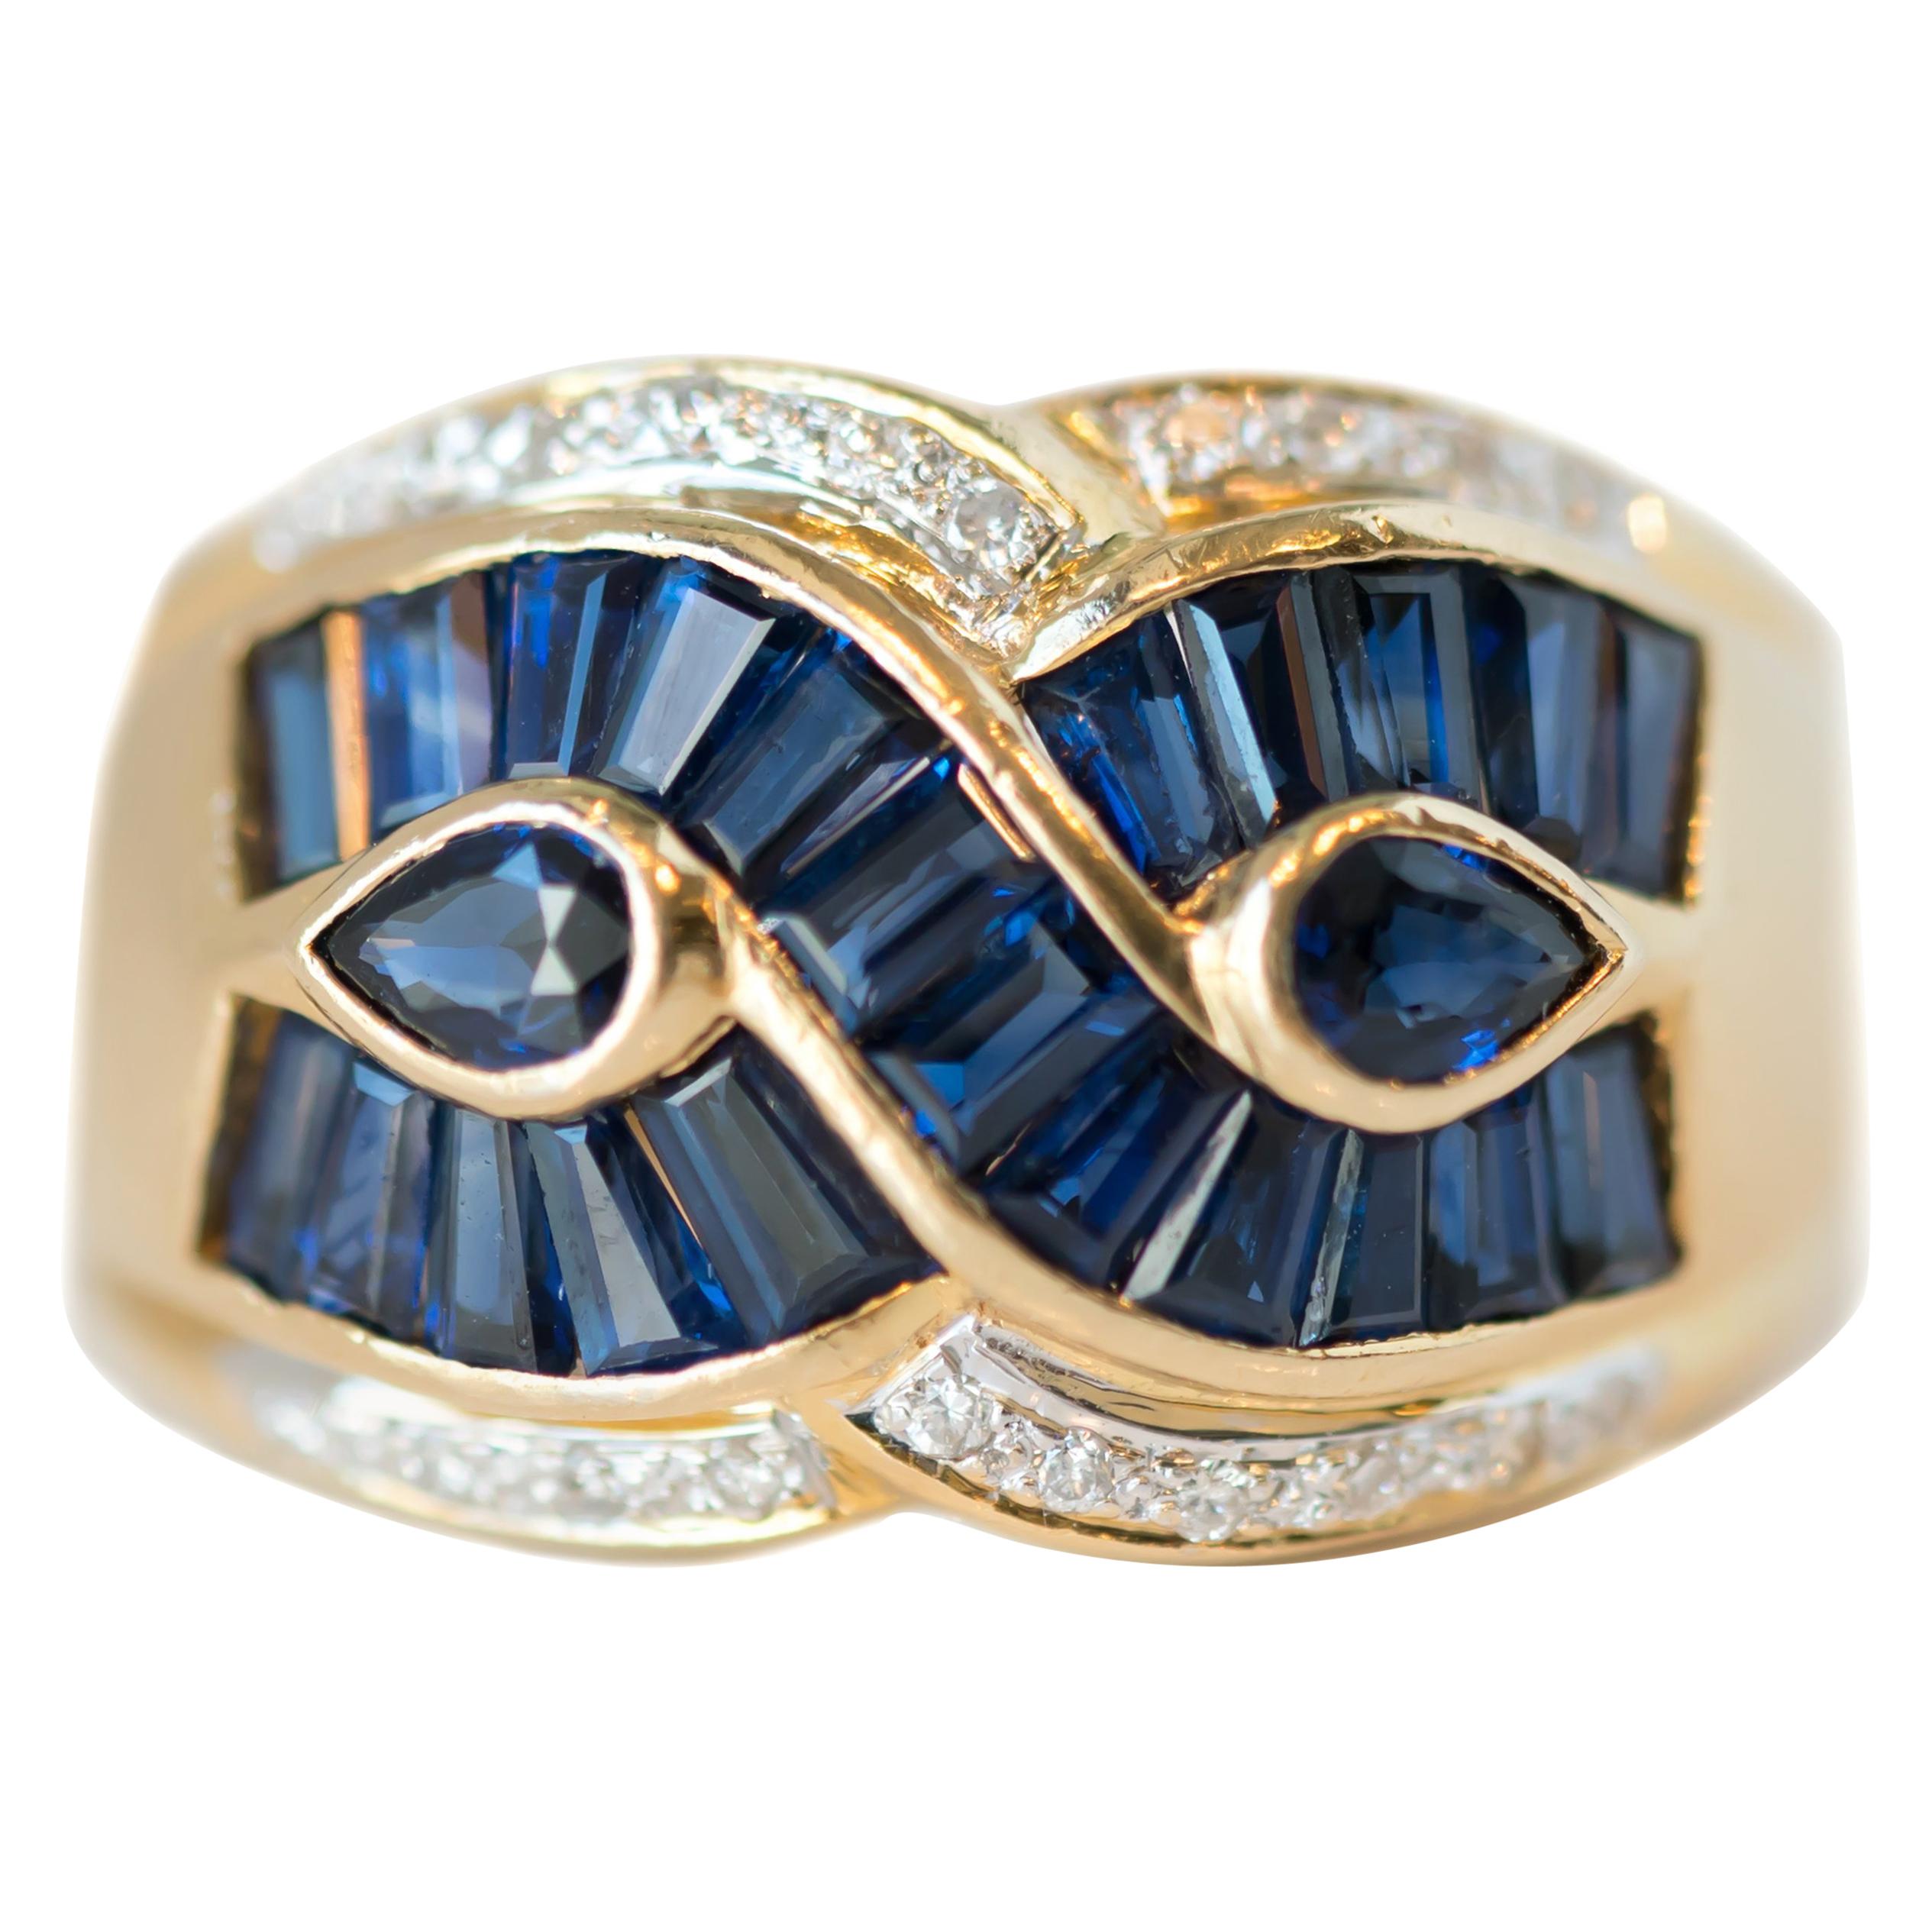 1950s 2 Carat Blue Sapphire, Diamond and 18 Karat Yellow Gold Cocktail Ring For Sale